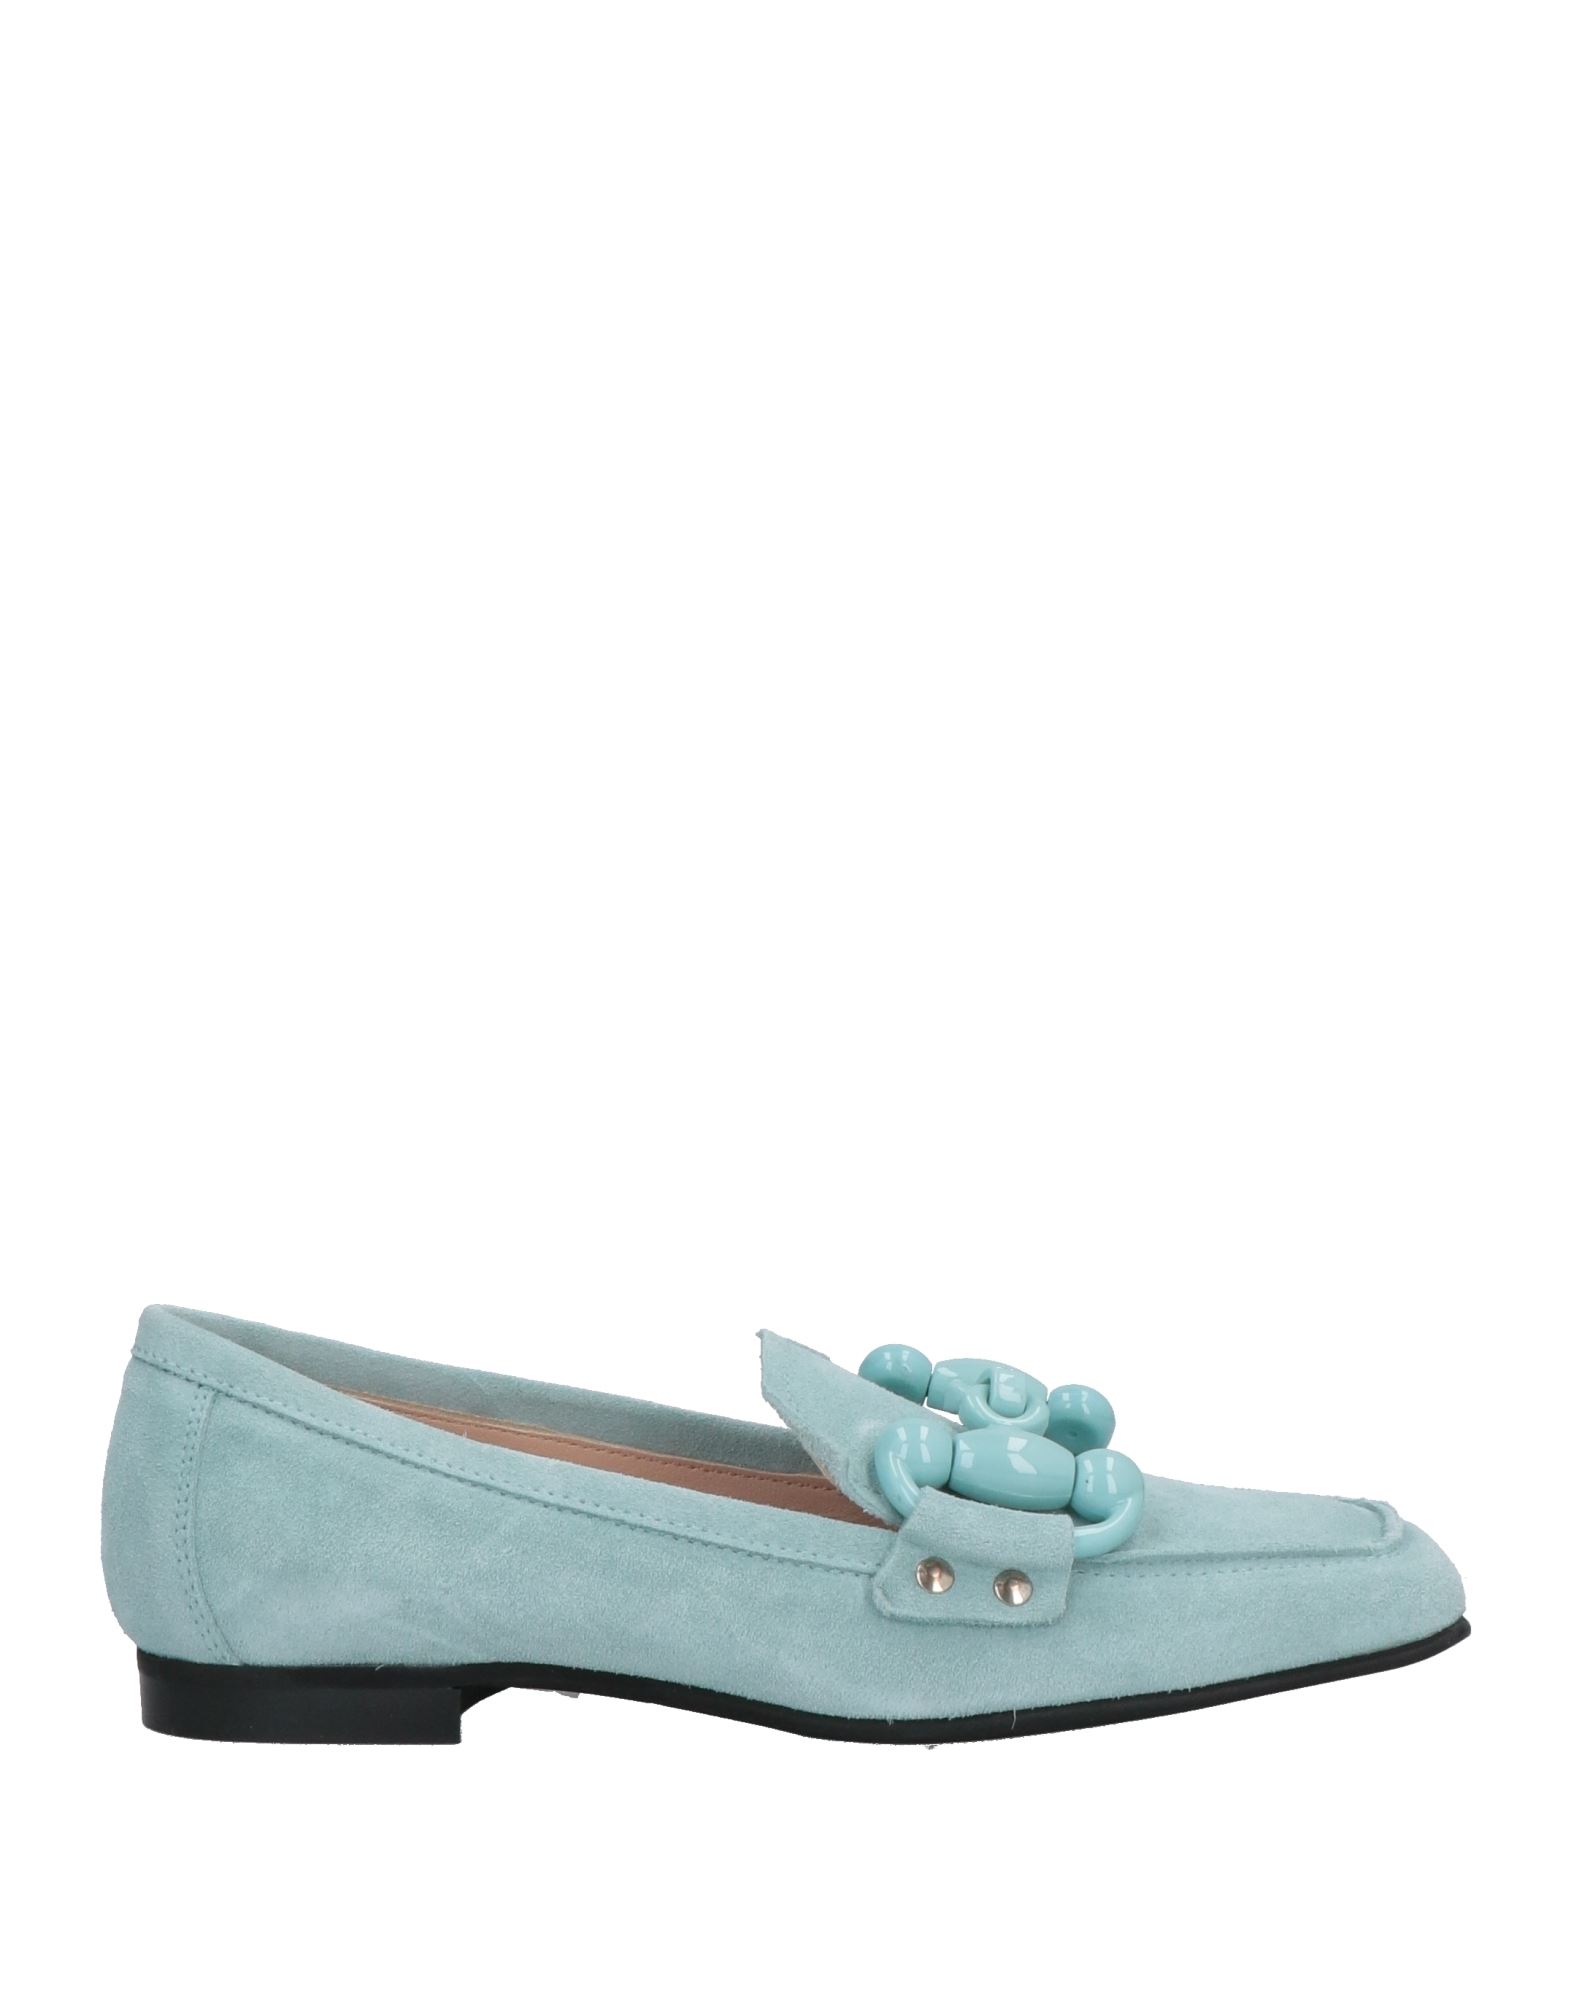 Janet & Janet Woman Loafers Sky Blue Size 8 Soft Leather